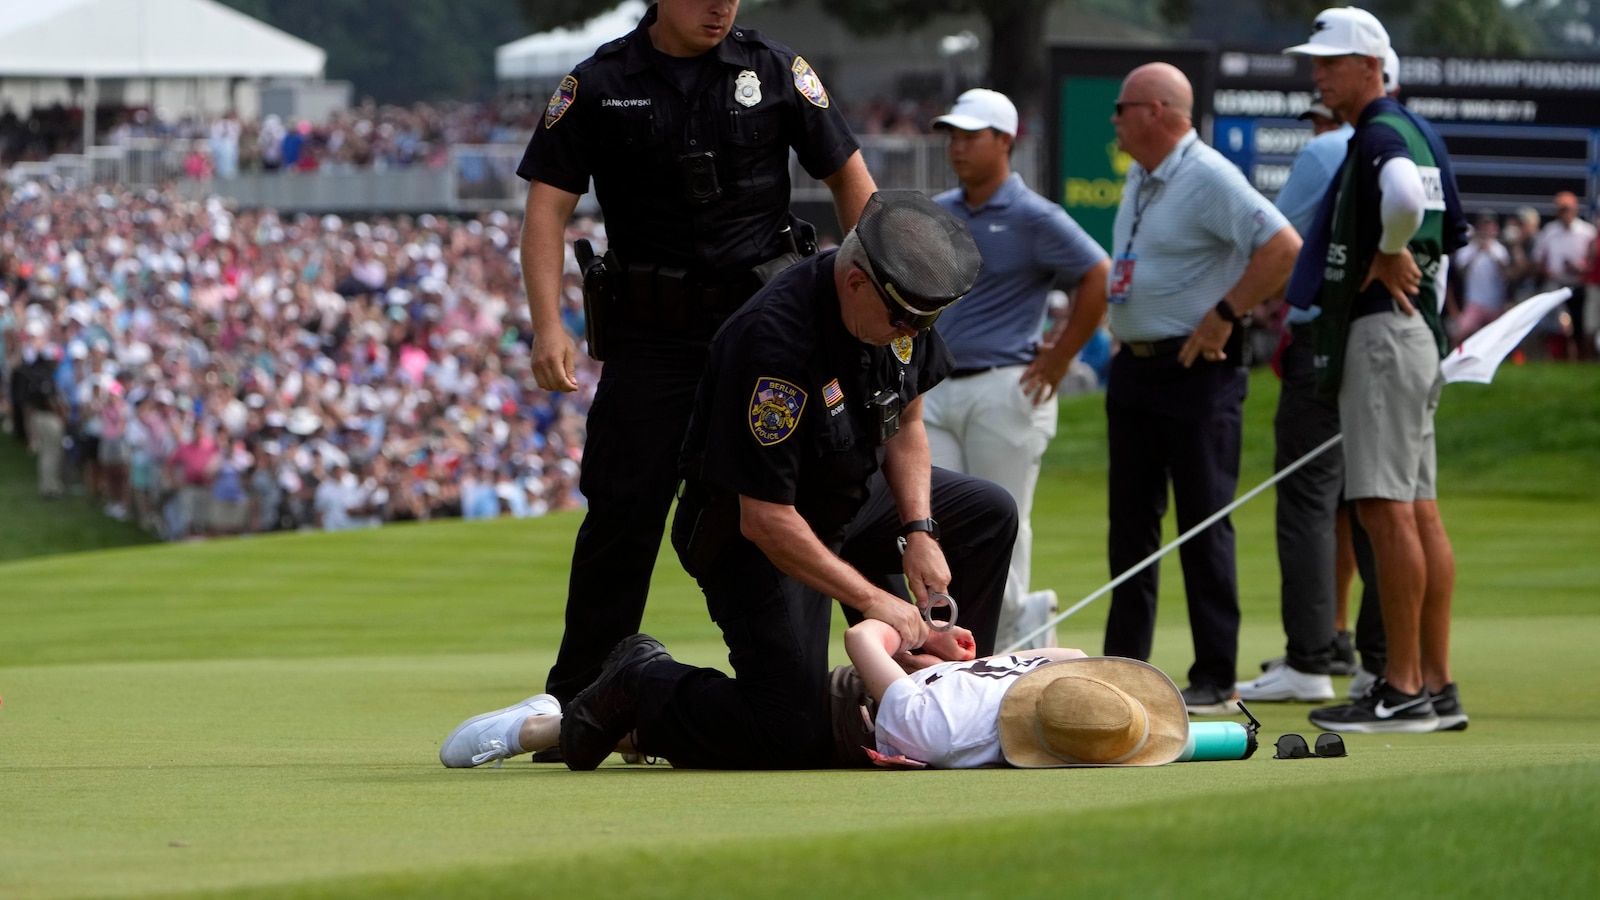 Six climate protesters run onto 18th green and spray powder, delaying finish of PGA Tour event